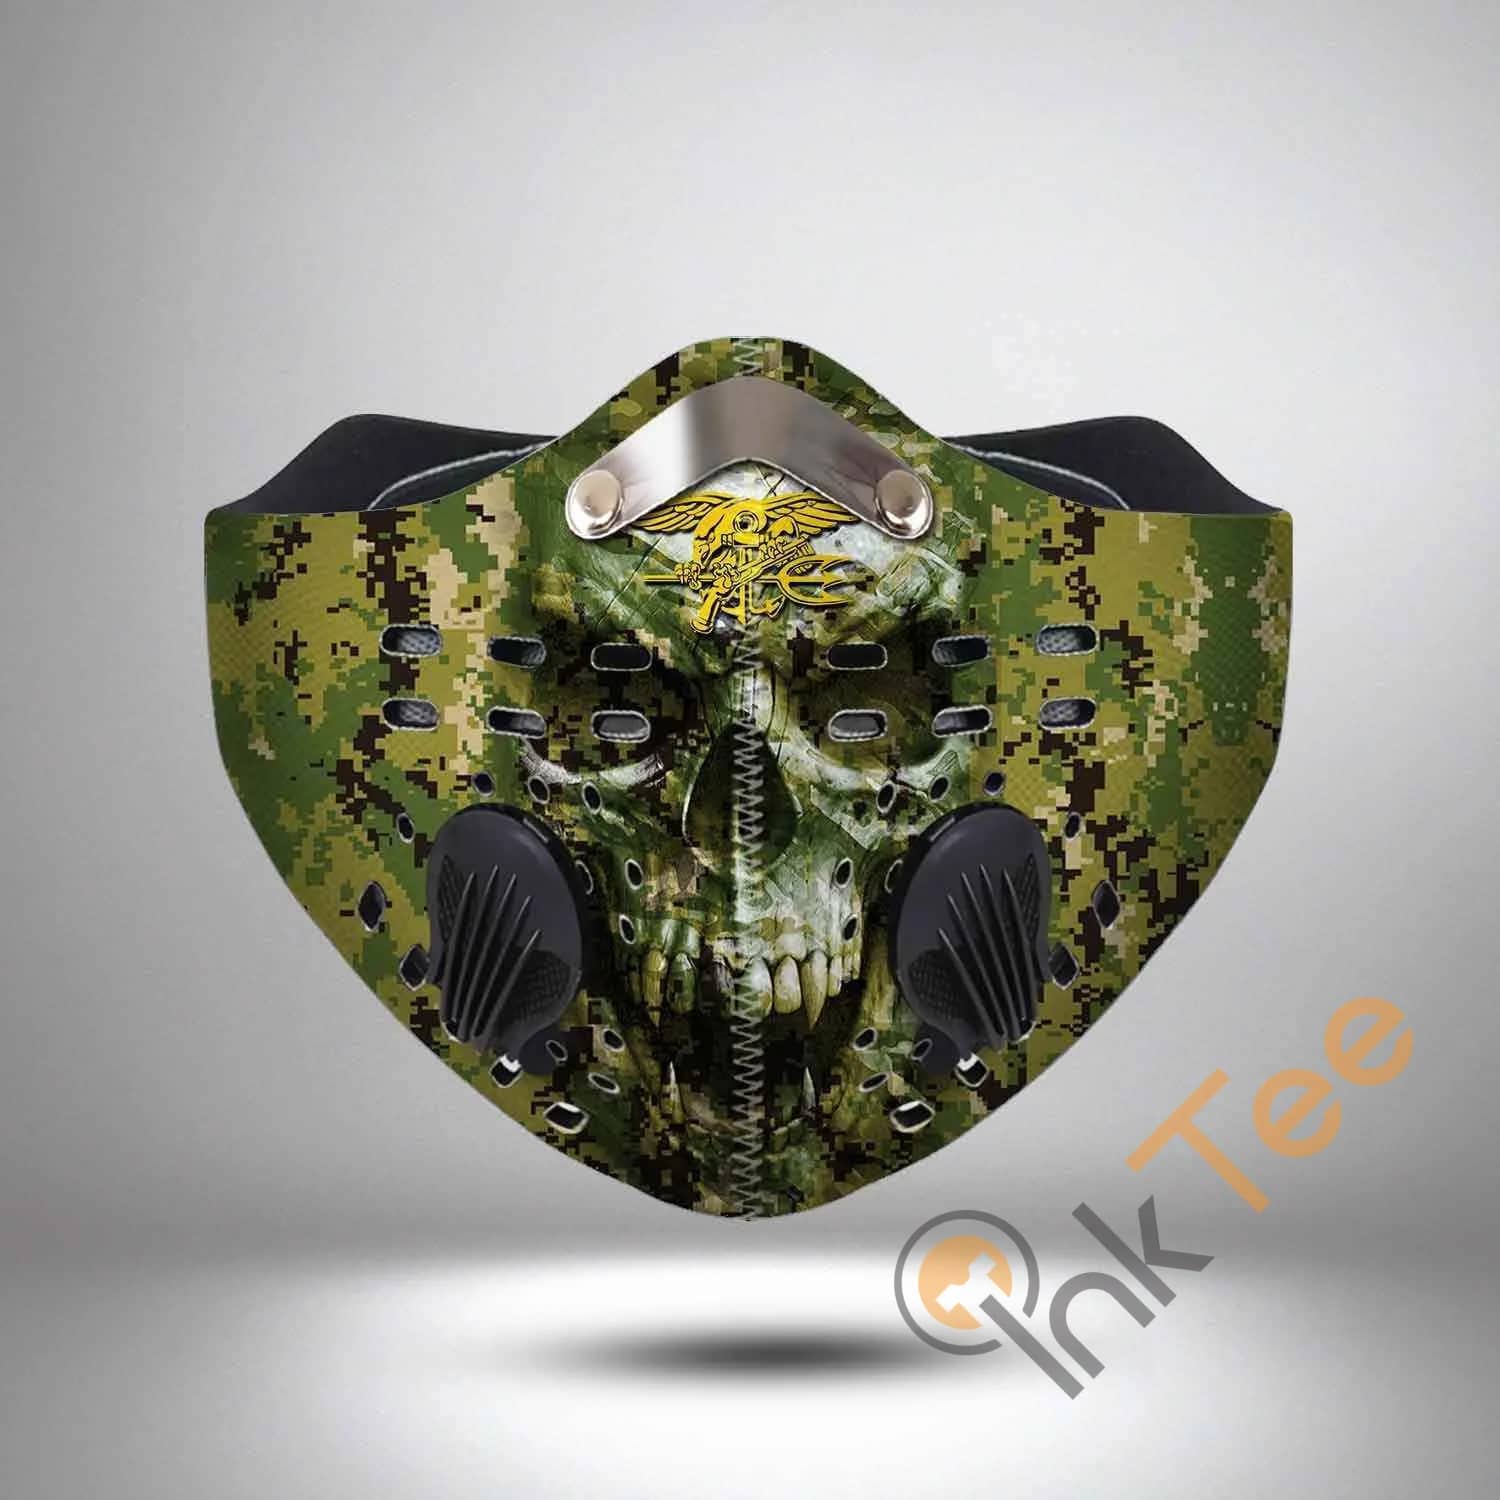 United States Navy Seals Camo Skull Filter Activated Carbon Pm 2.5 Fm Sku 5998 Face Mask